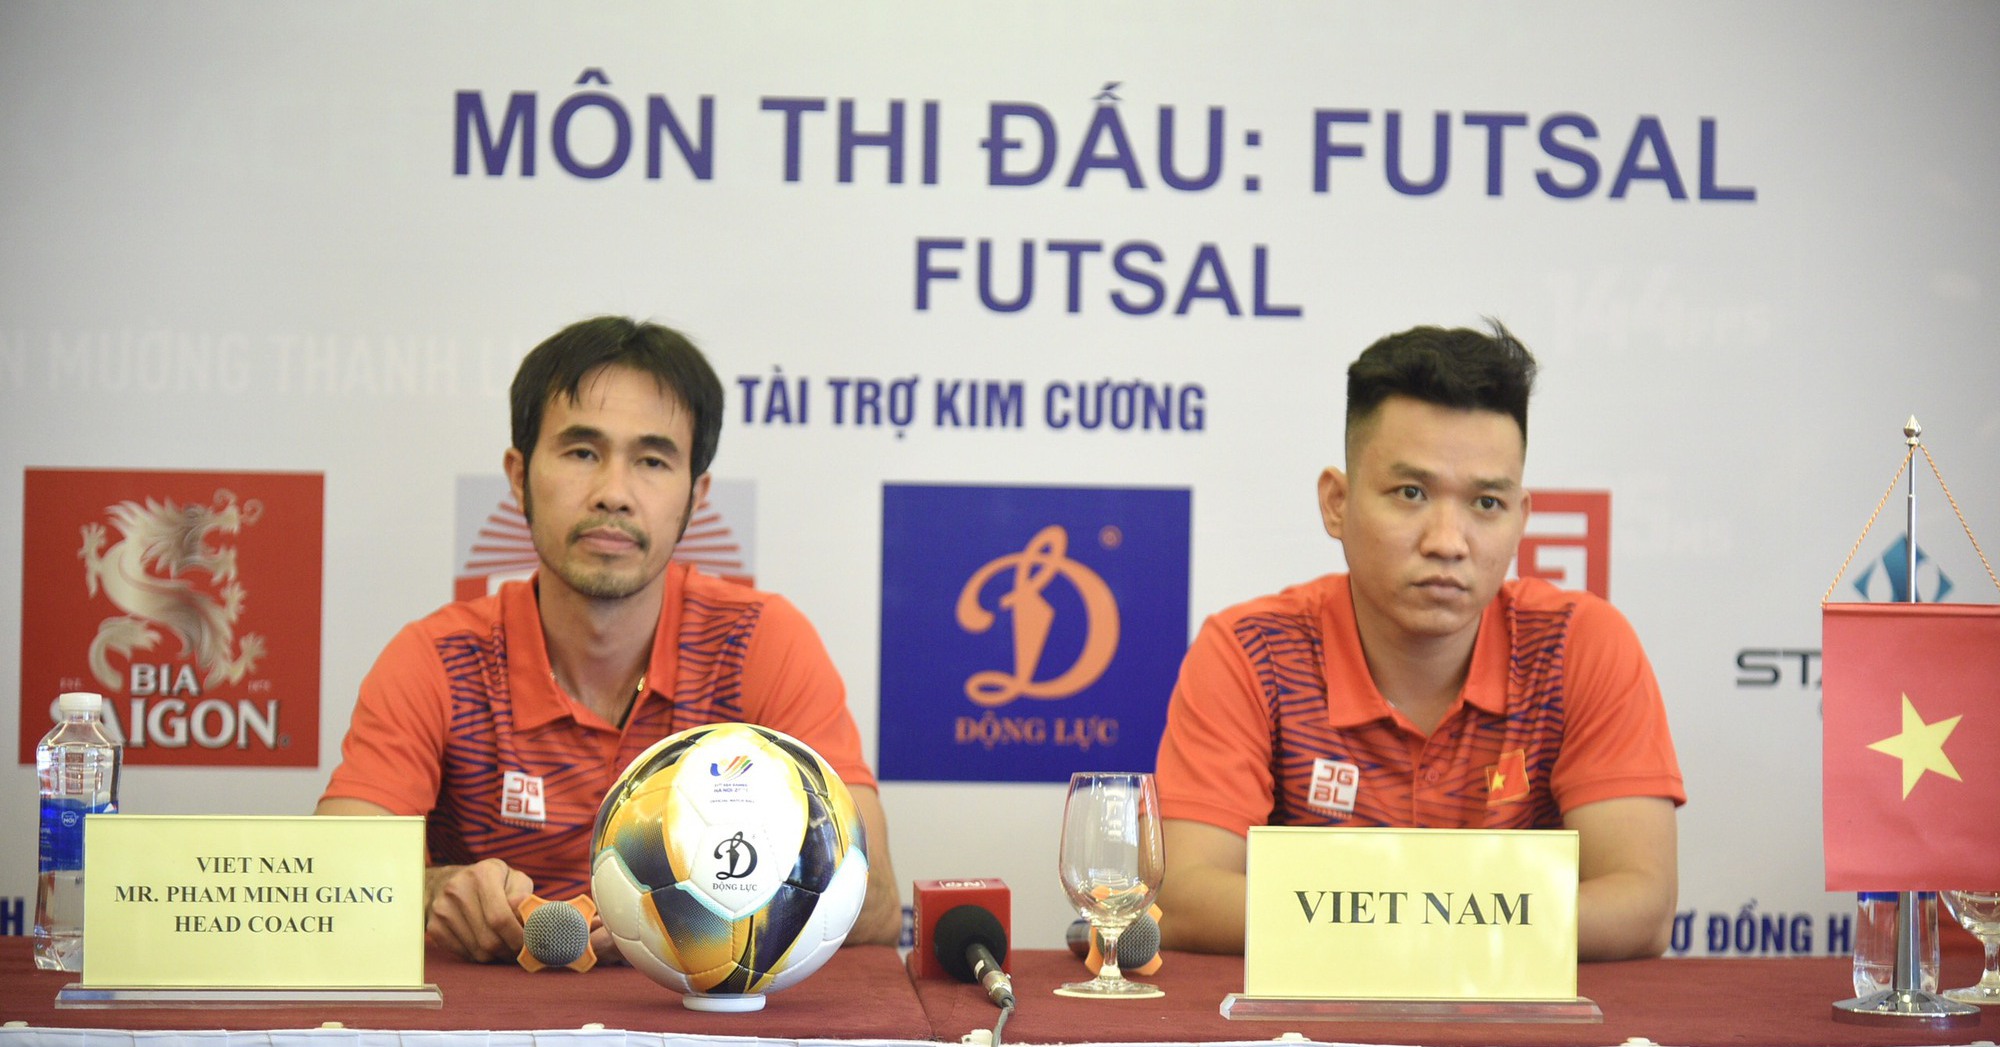 Vietnam futsal team: Deciding to compete for gold at SEA Games 31 despite many players infected with Covid-19